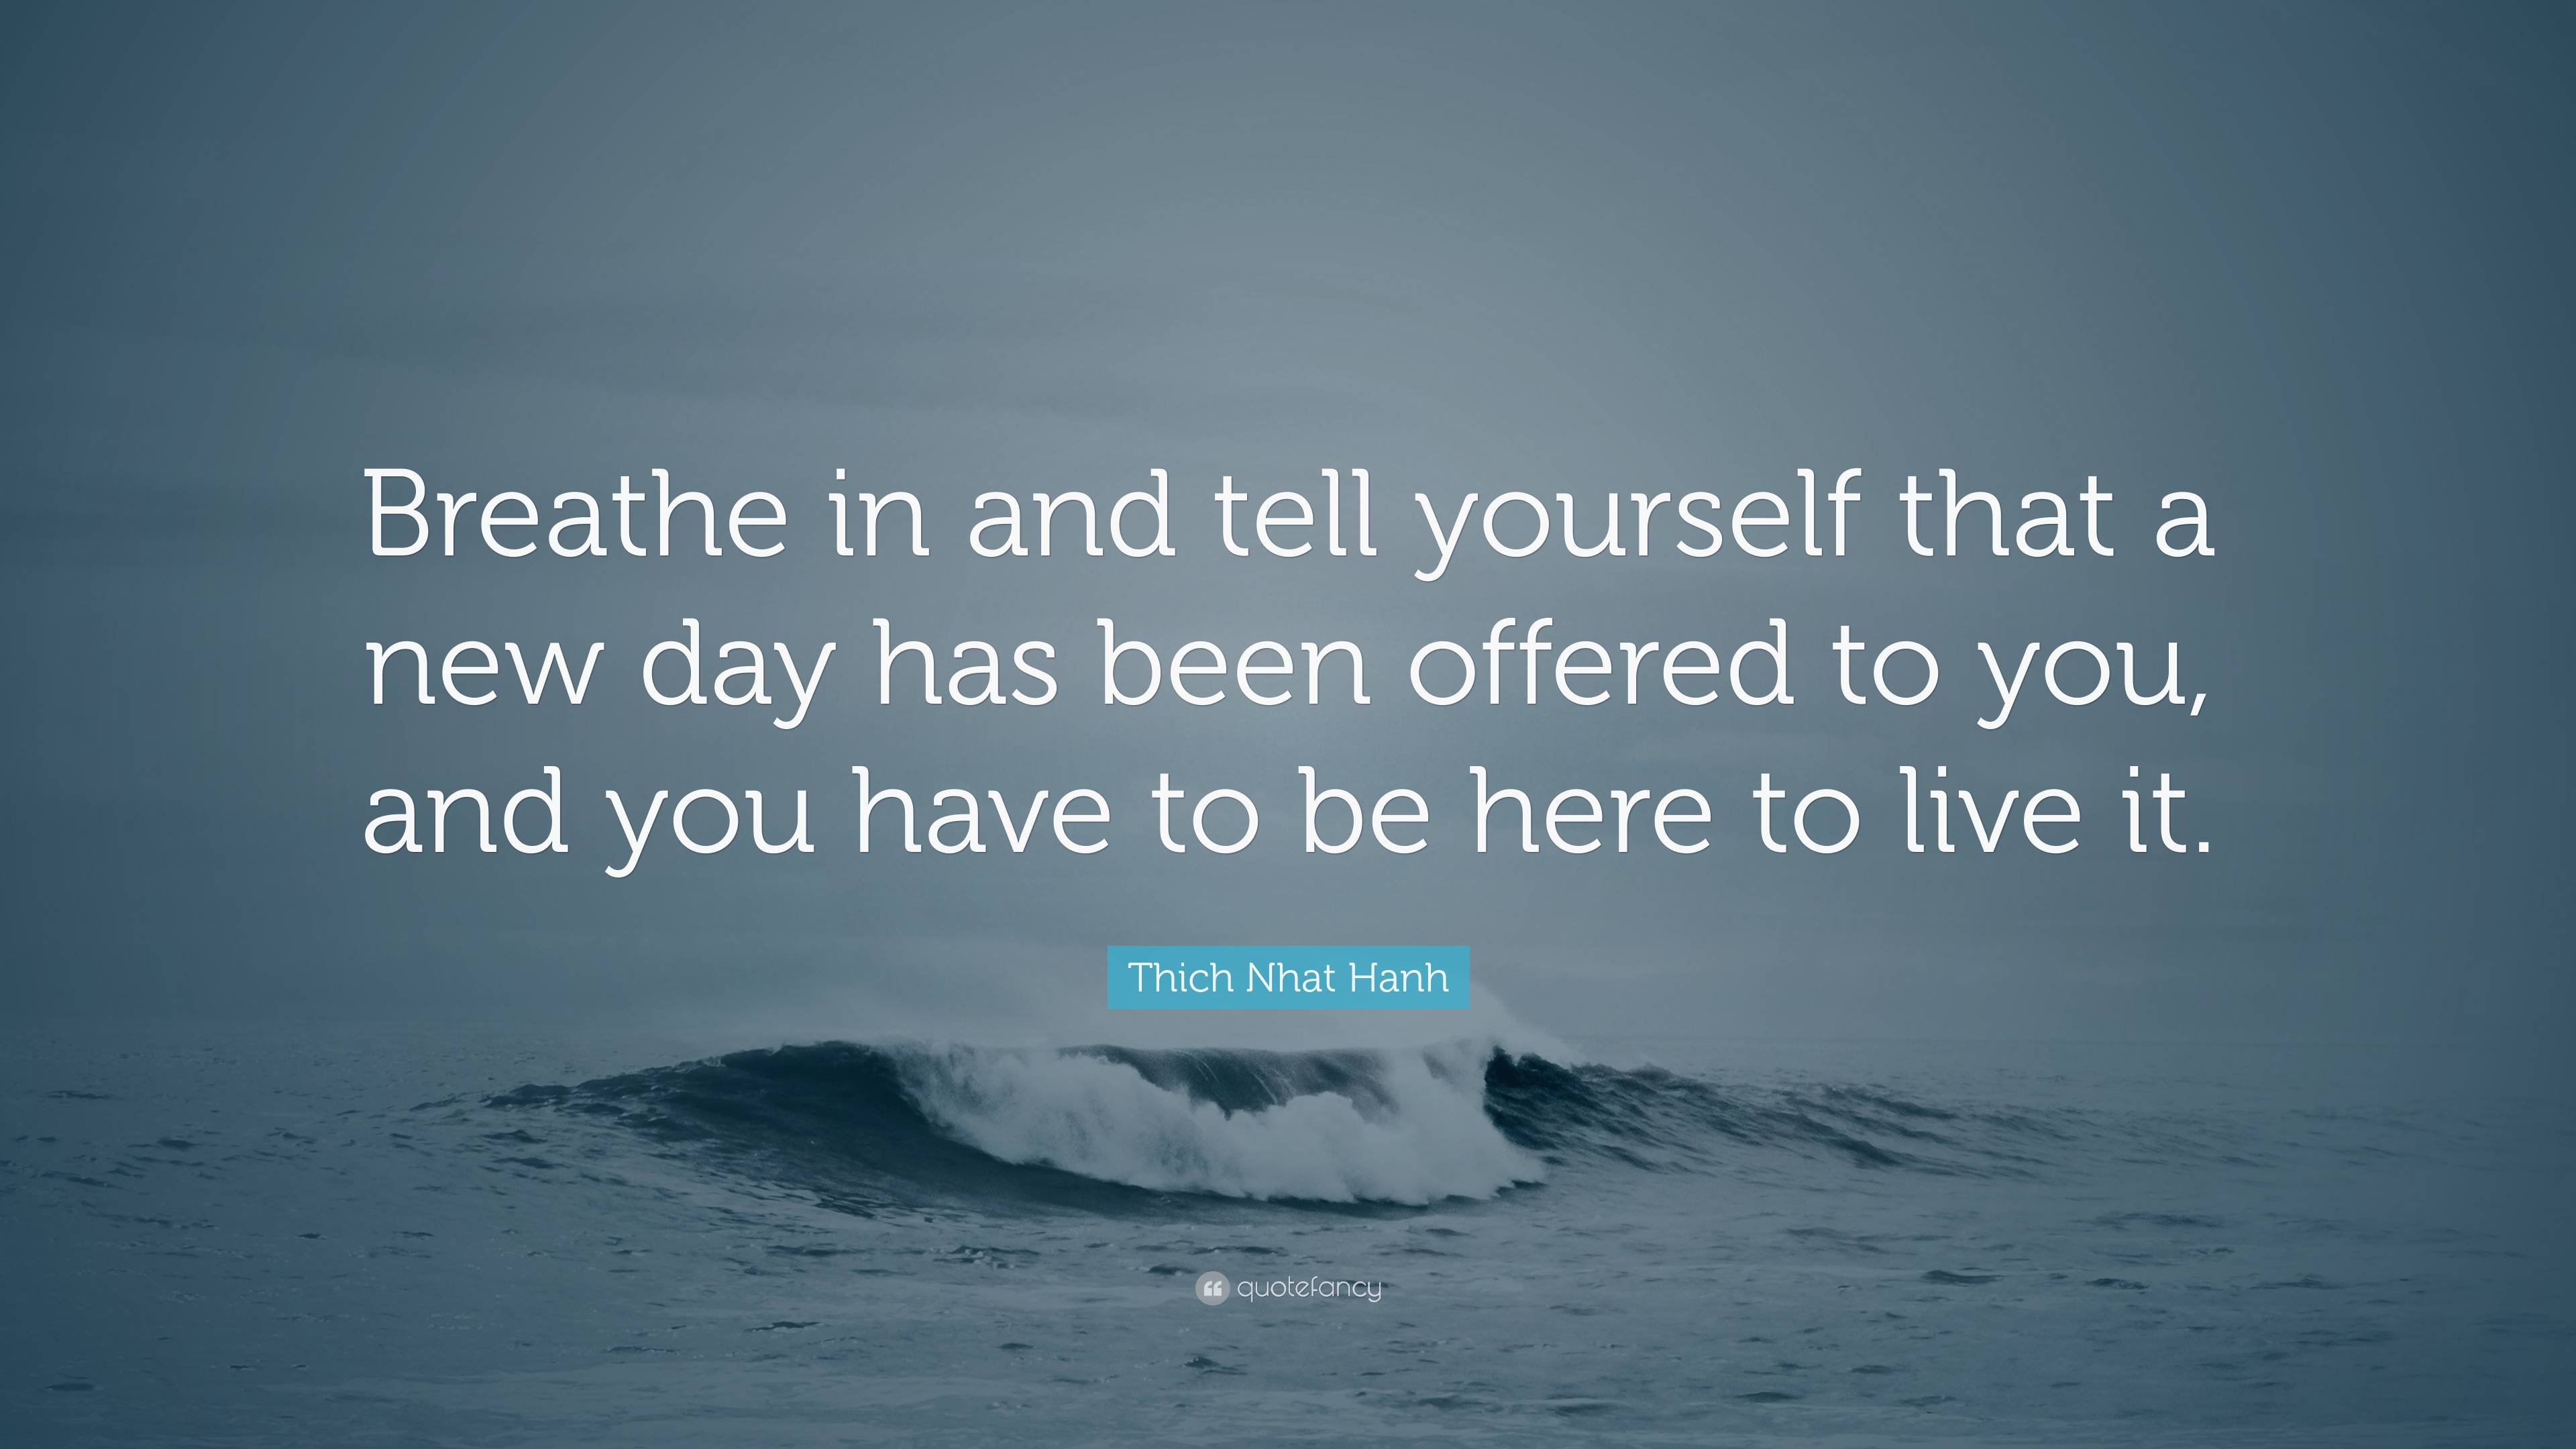 Thich Nhat Hanh Quote: “Breathe in and tell yourself that a new day has  been offered